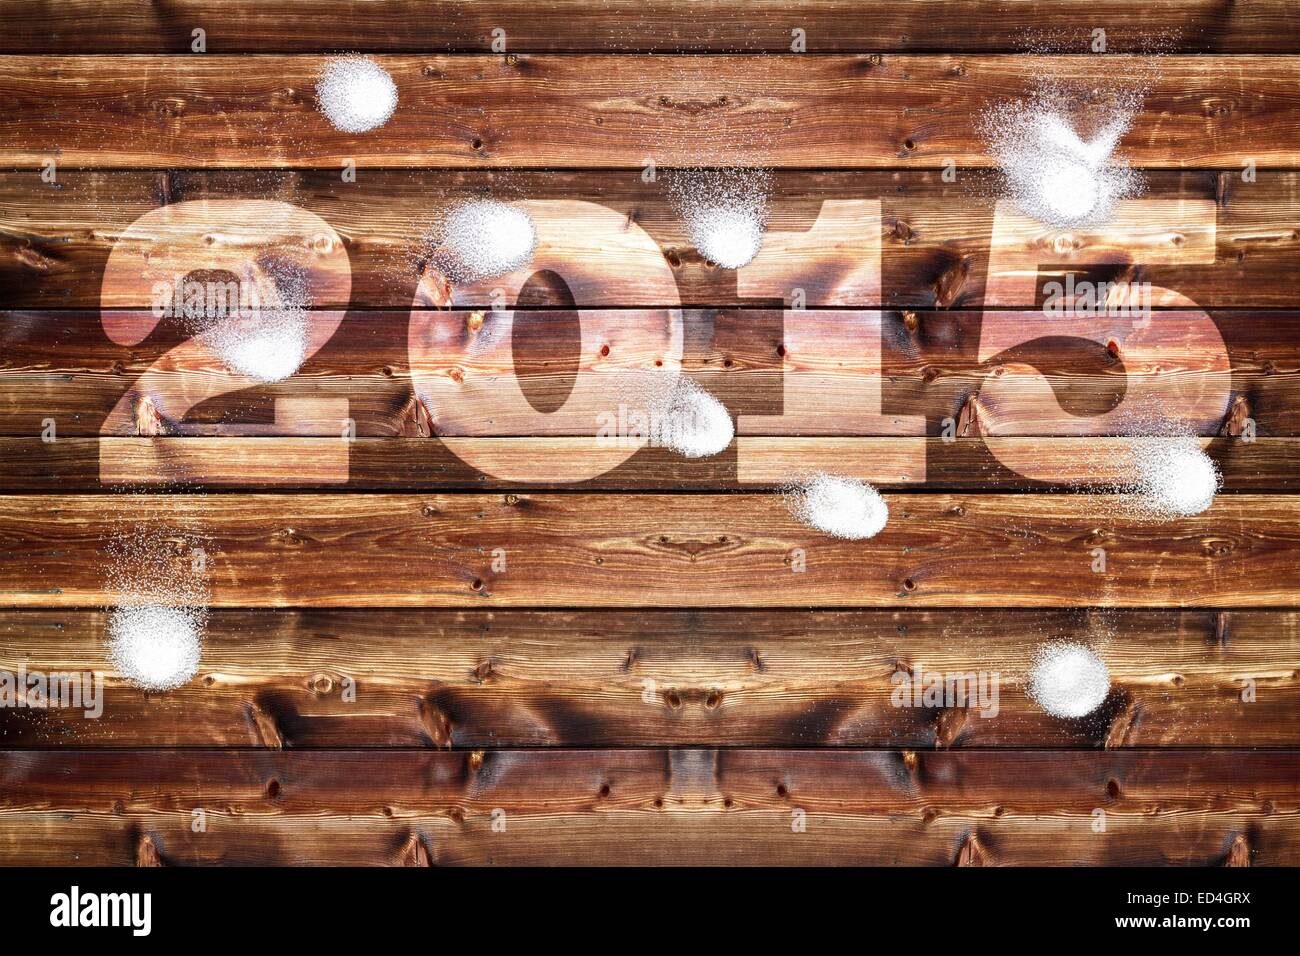 Wooden board with bleached out 2015 letters, which is bombarded with snowballs. Stock Photo